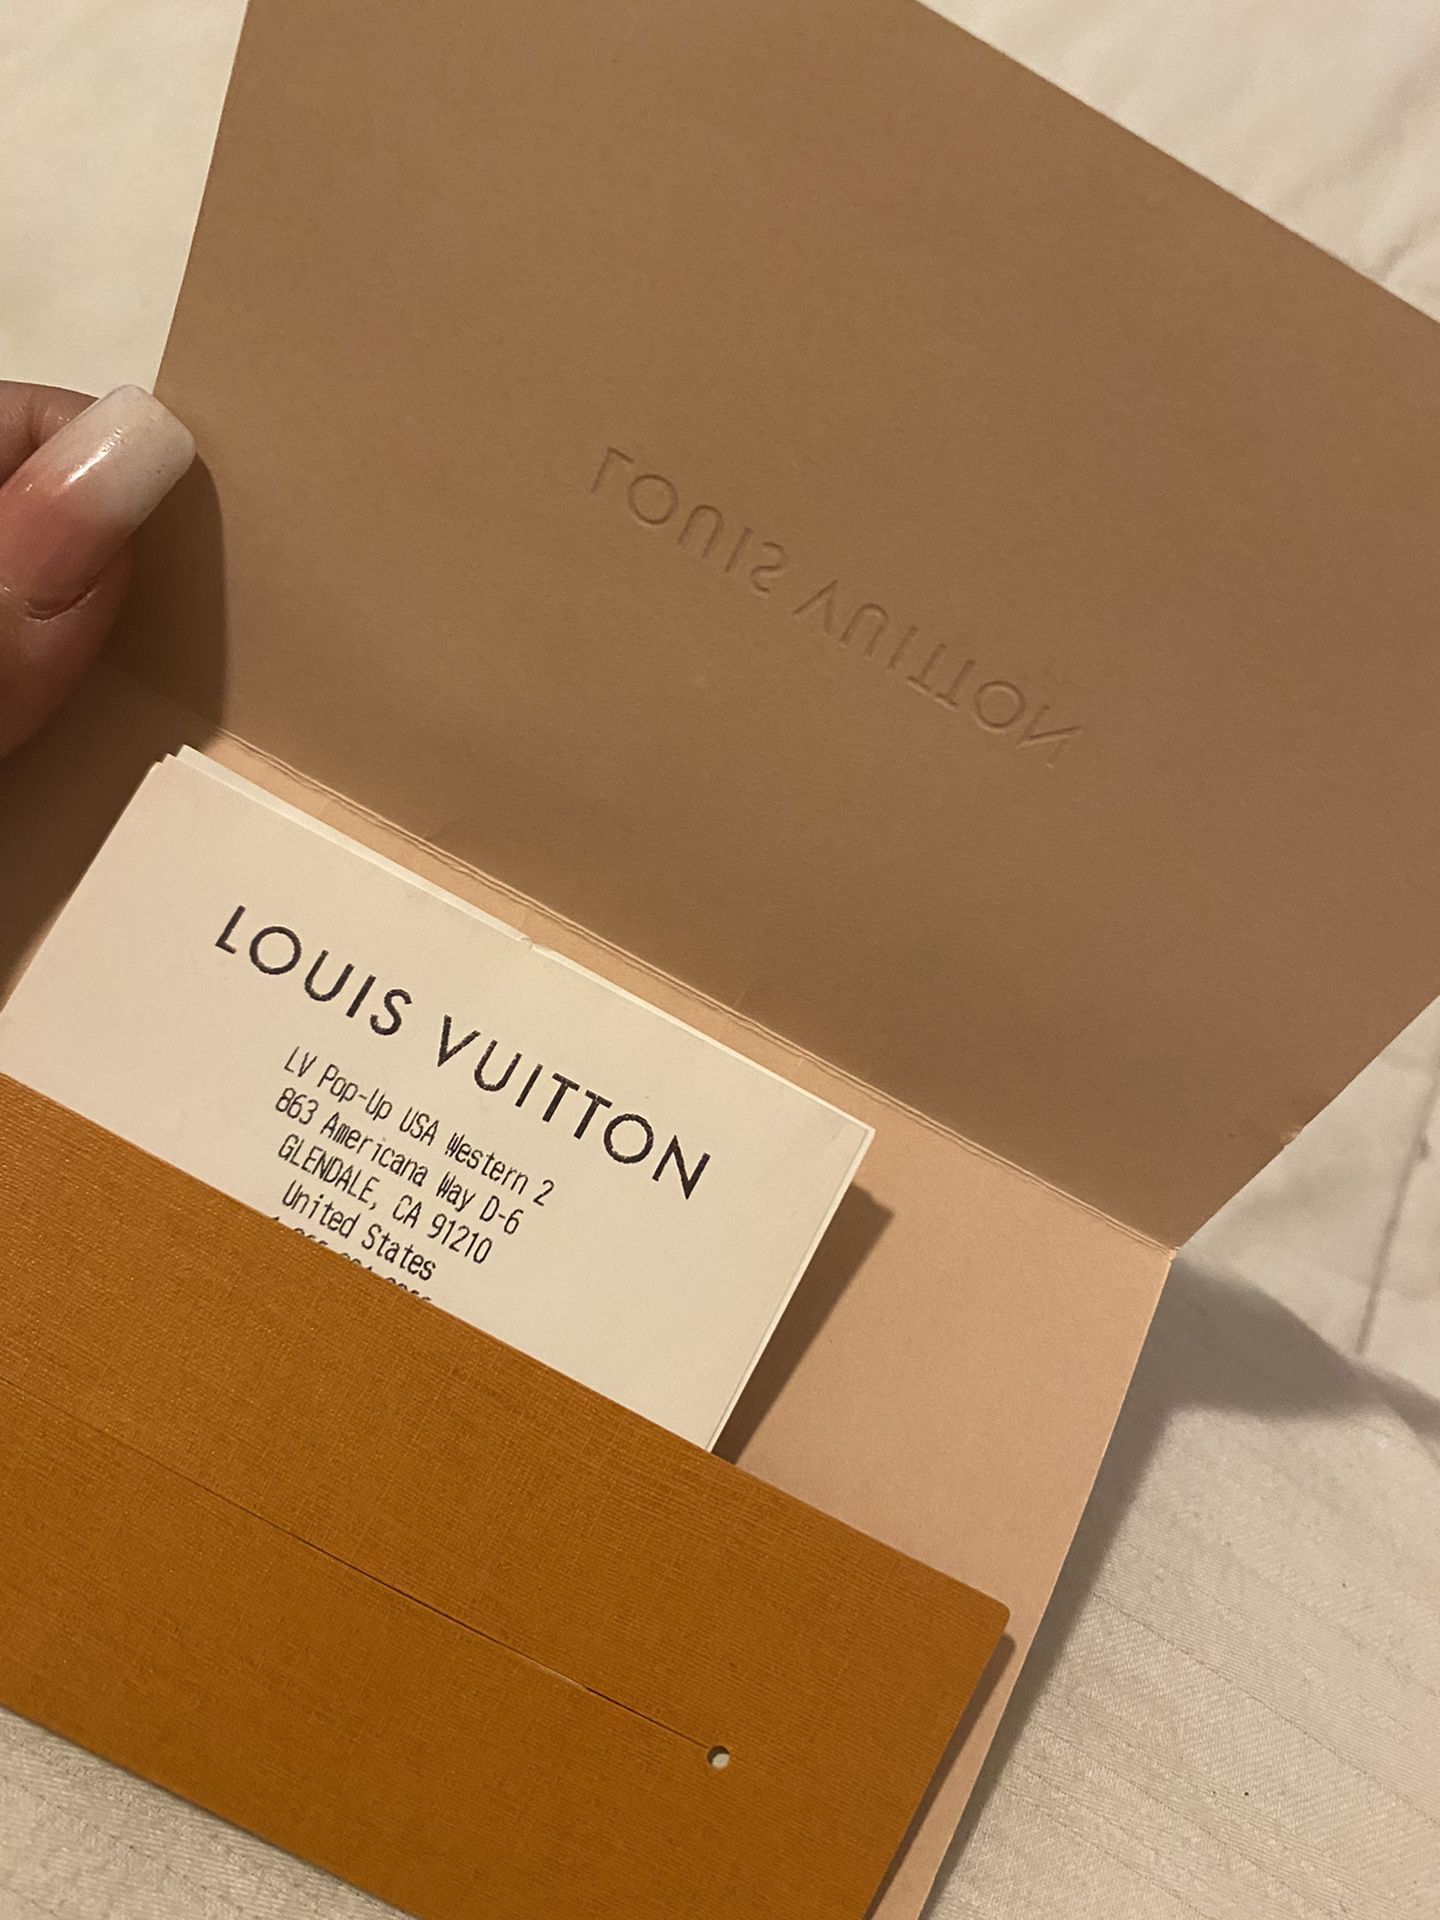 Auth Louis Vuitton Chantilly PM for Sale in Los Angeles, CA - OfferUp